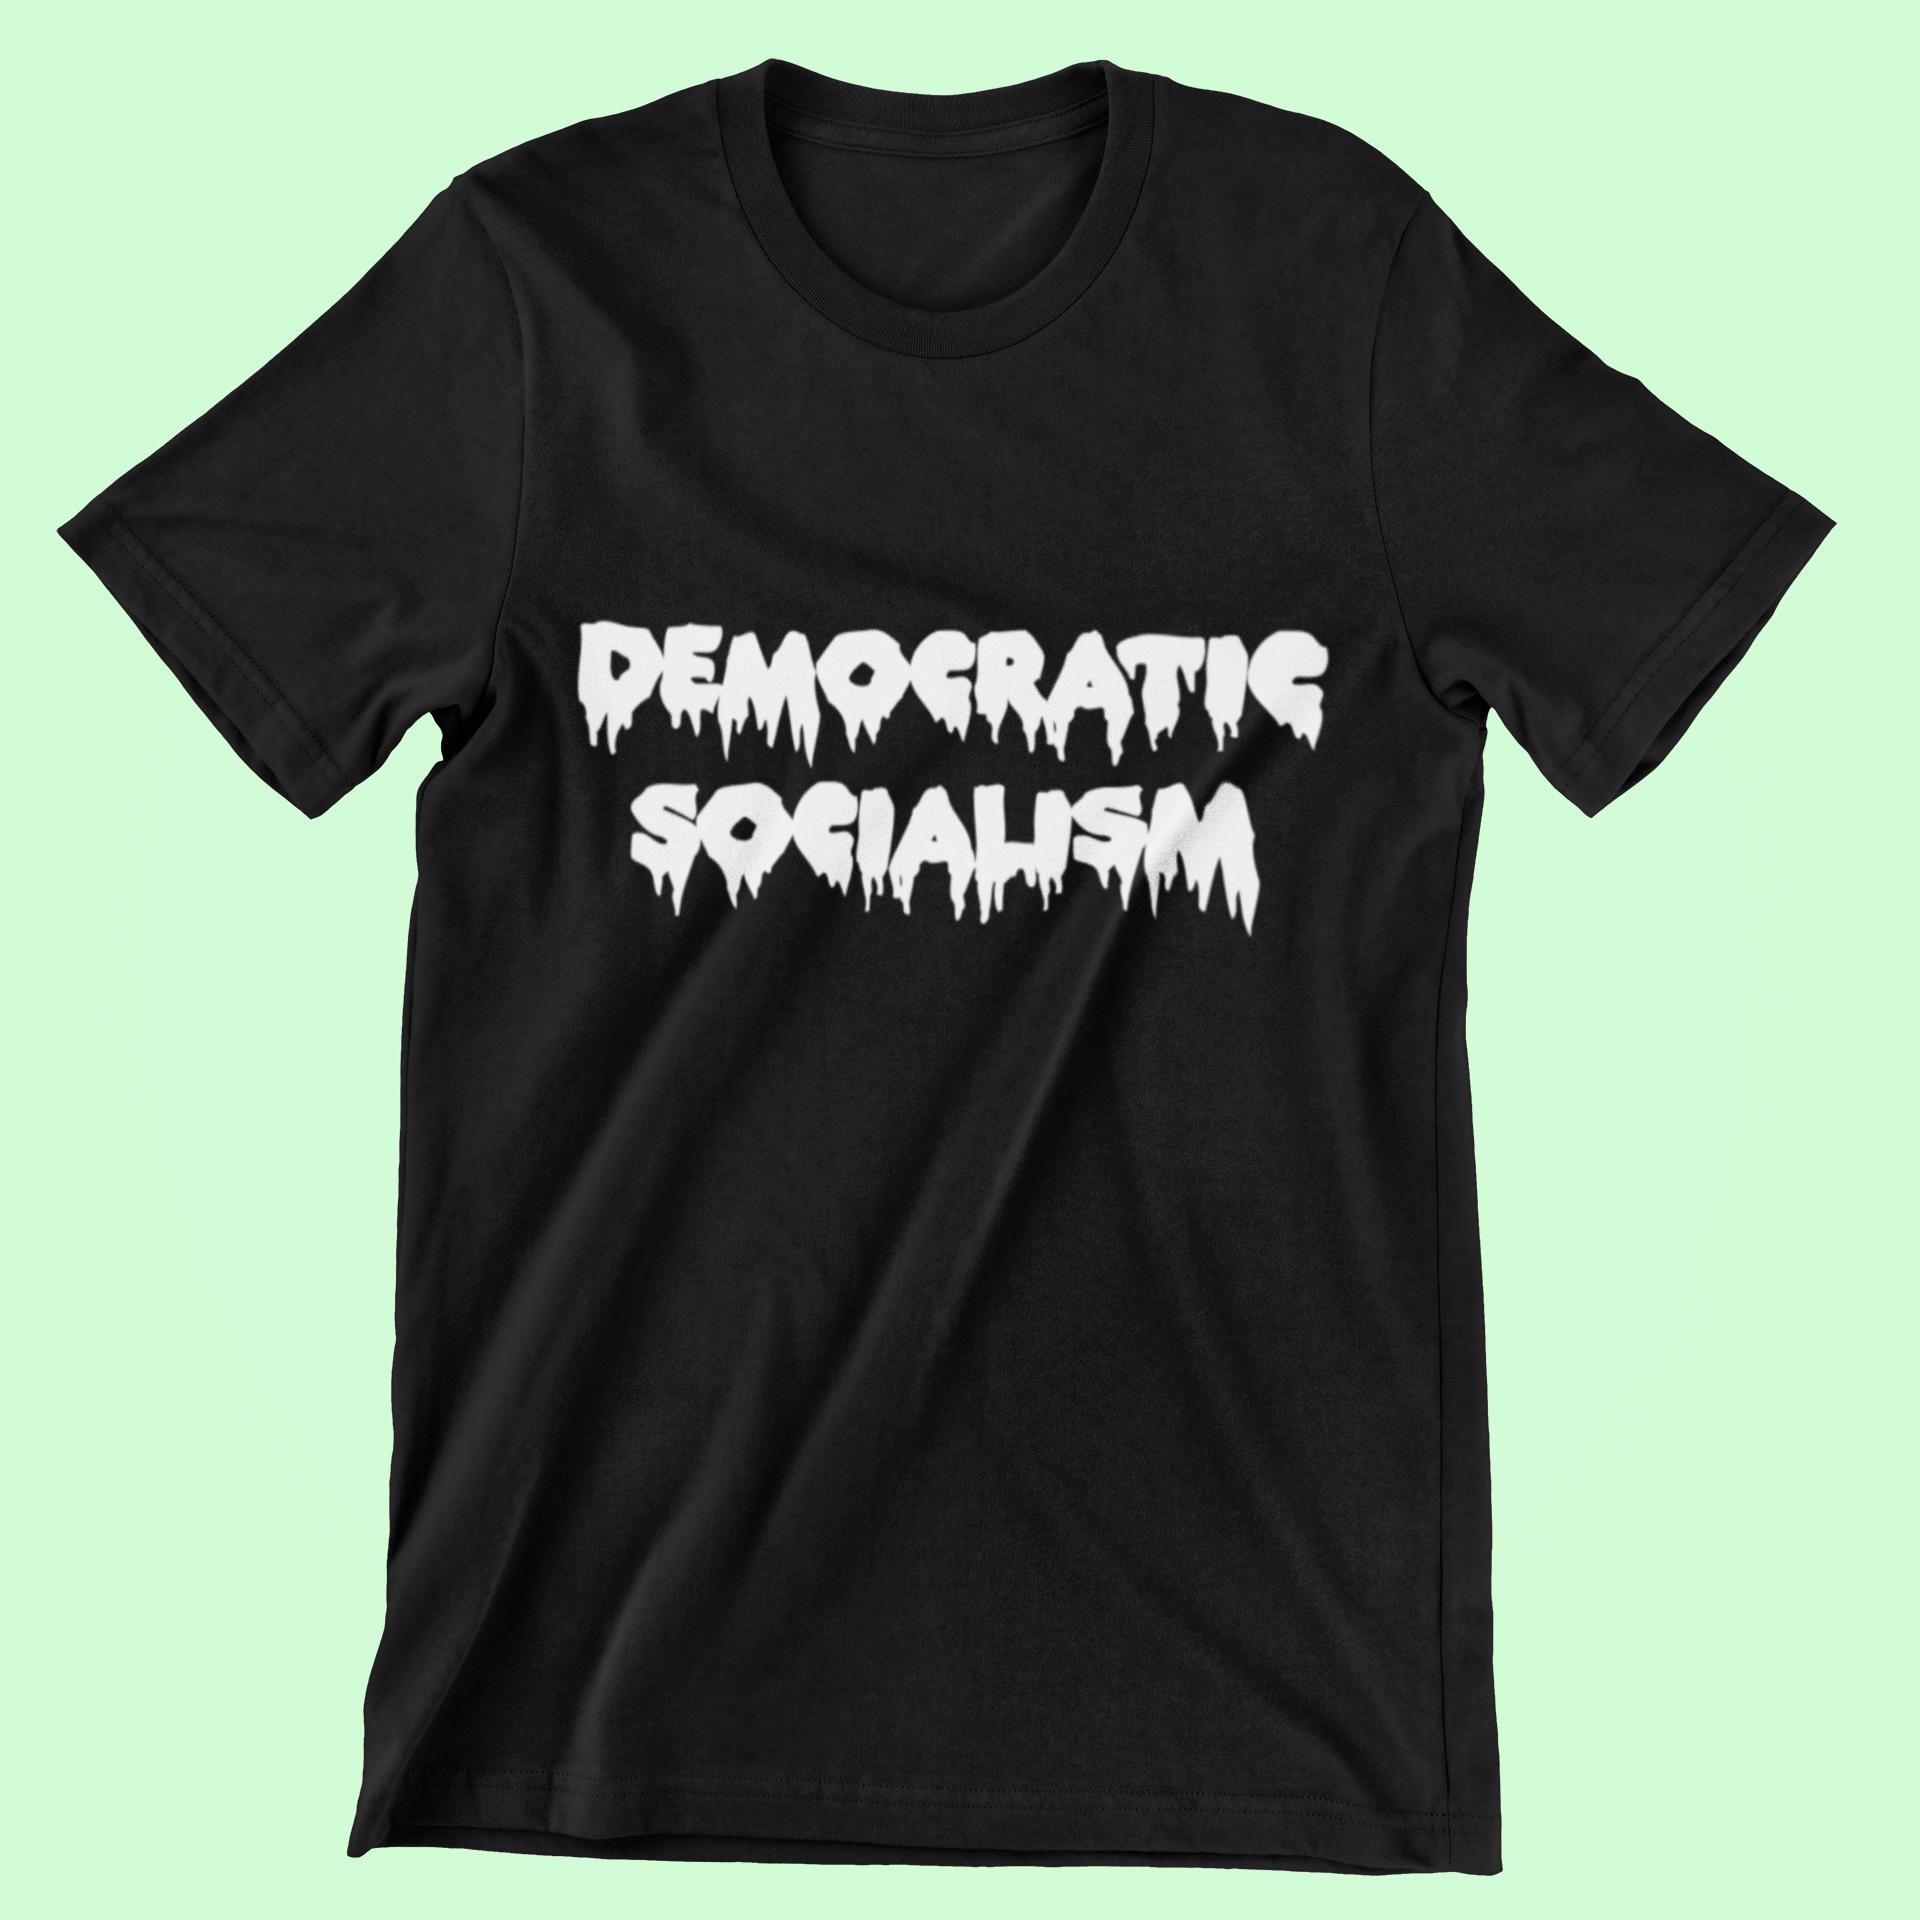 Black cotton unisex t-shirt with white spooky halloween text reading "Democratic Socialism" on a mint green background